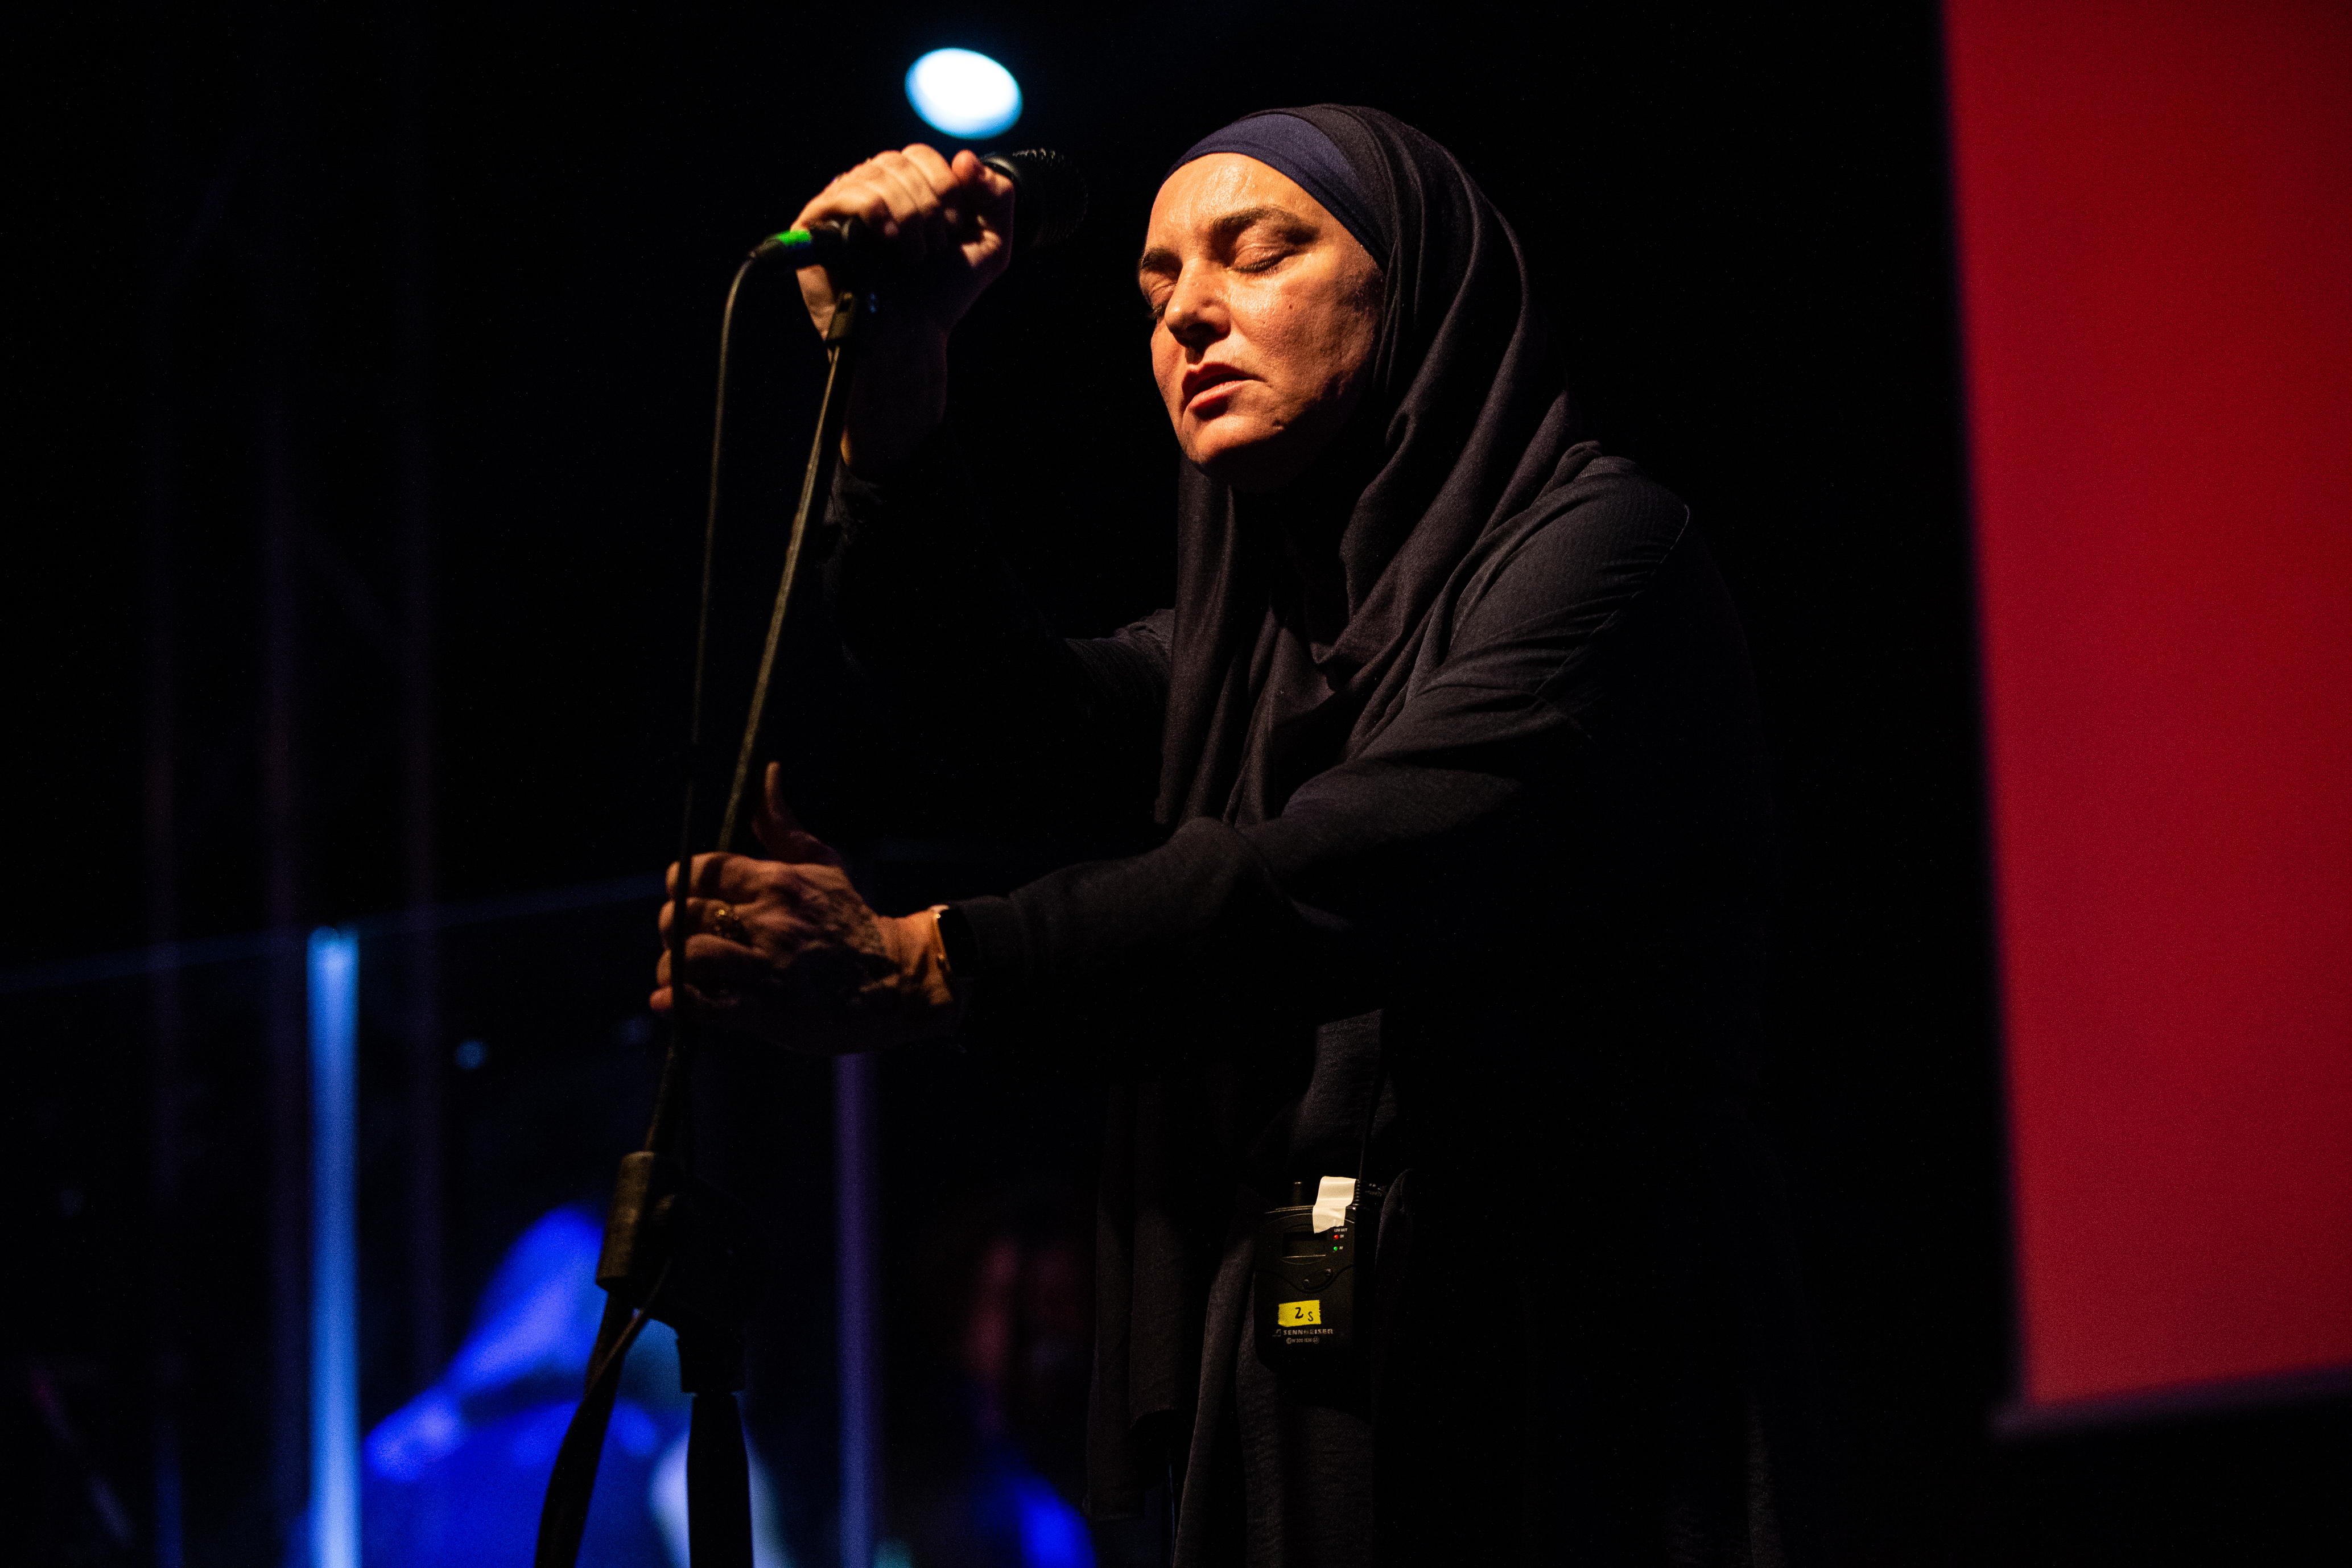 Sinéad O'Connor in Turin, Italy on January 19, 2020 | Source: Getty Images